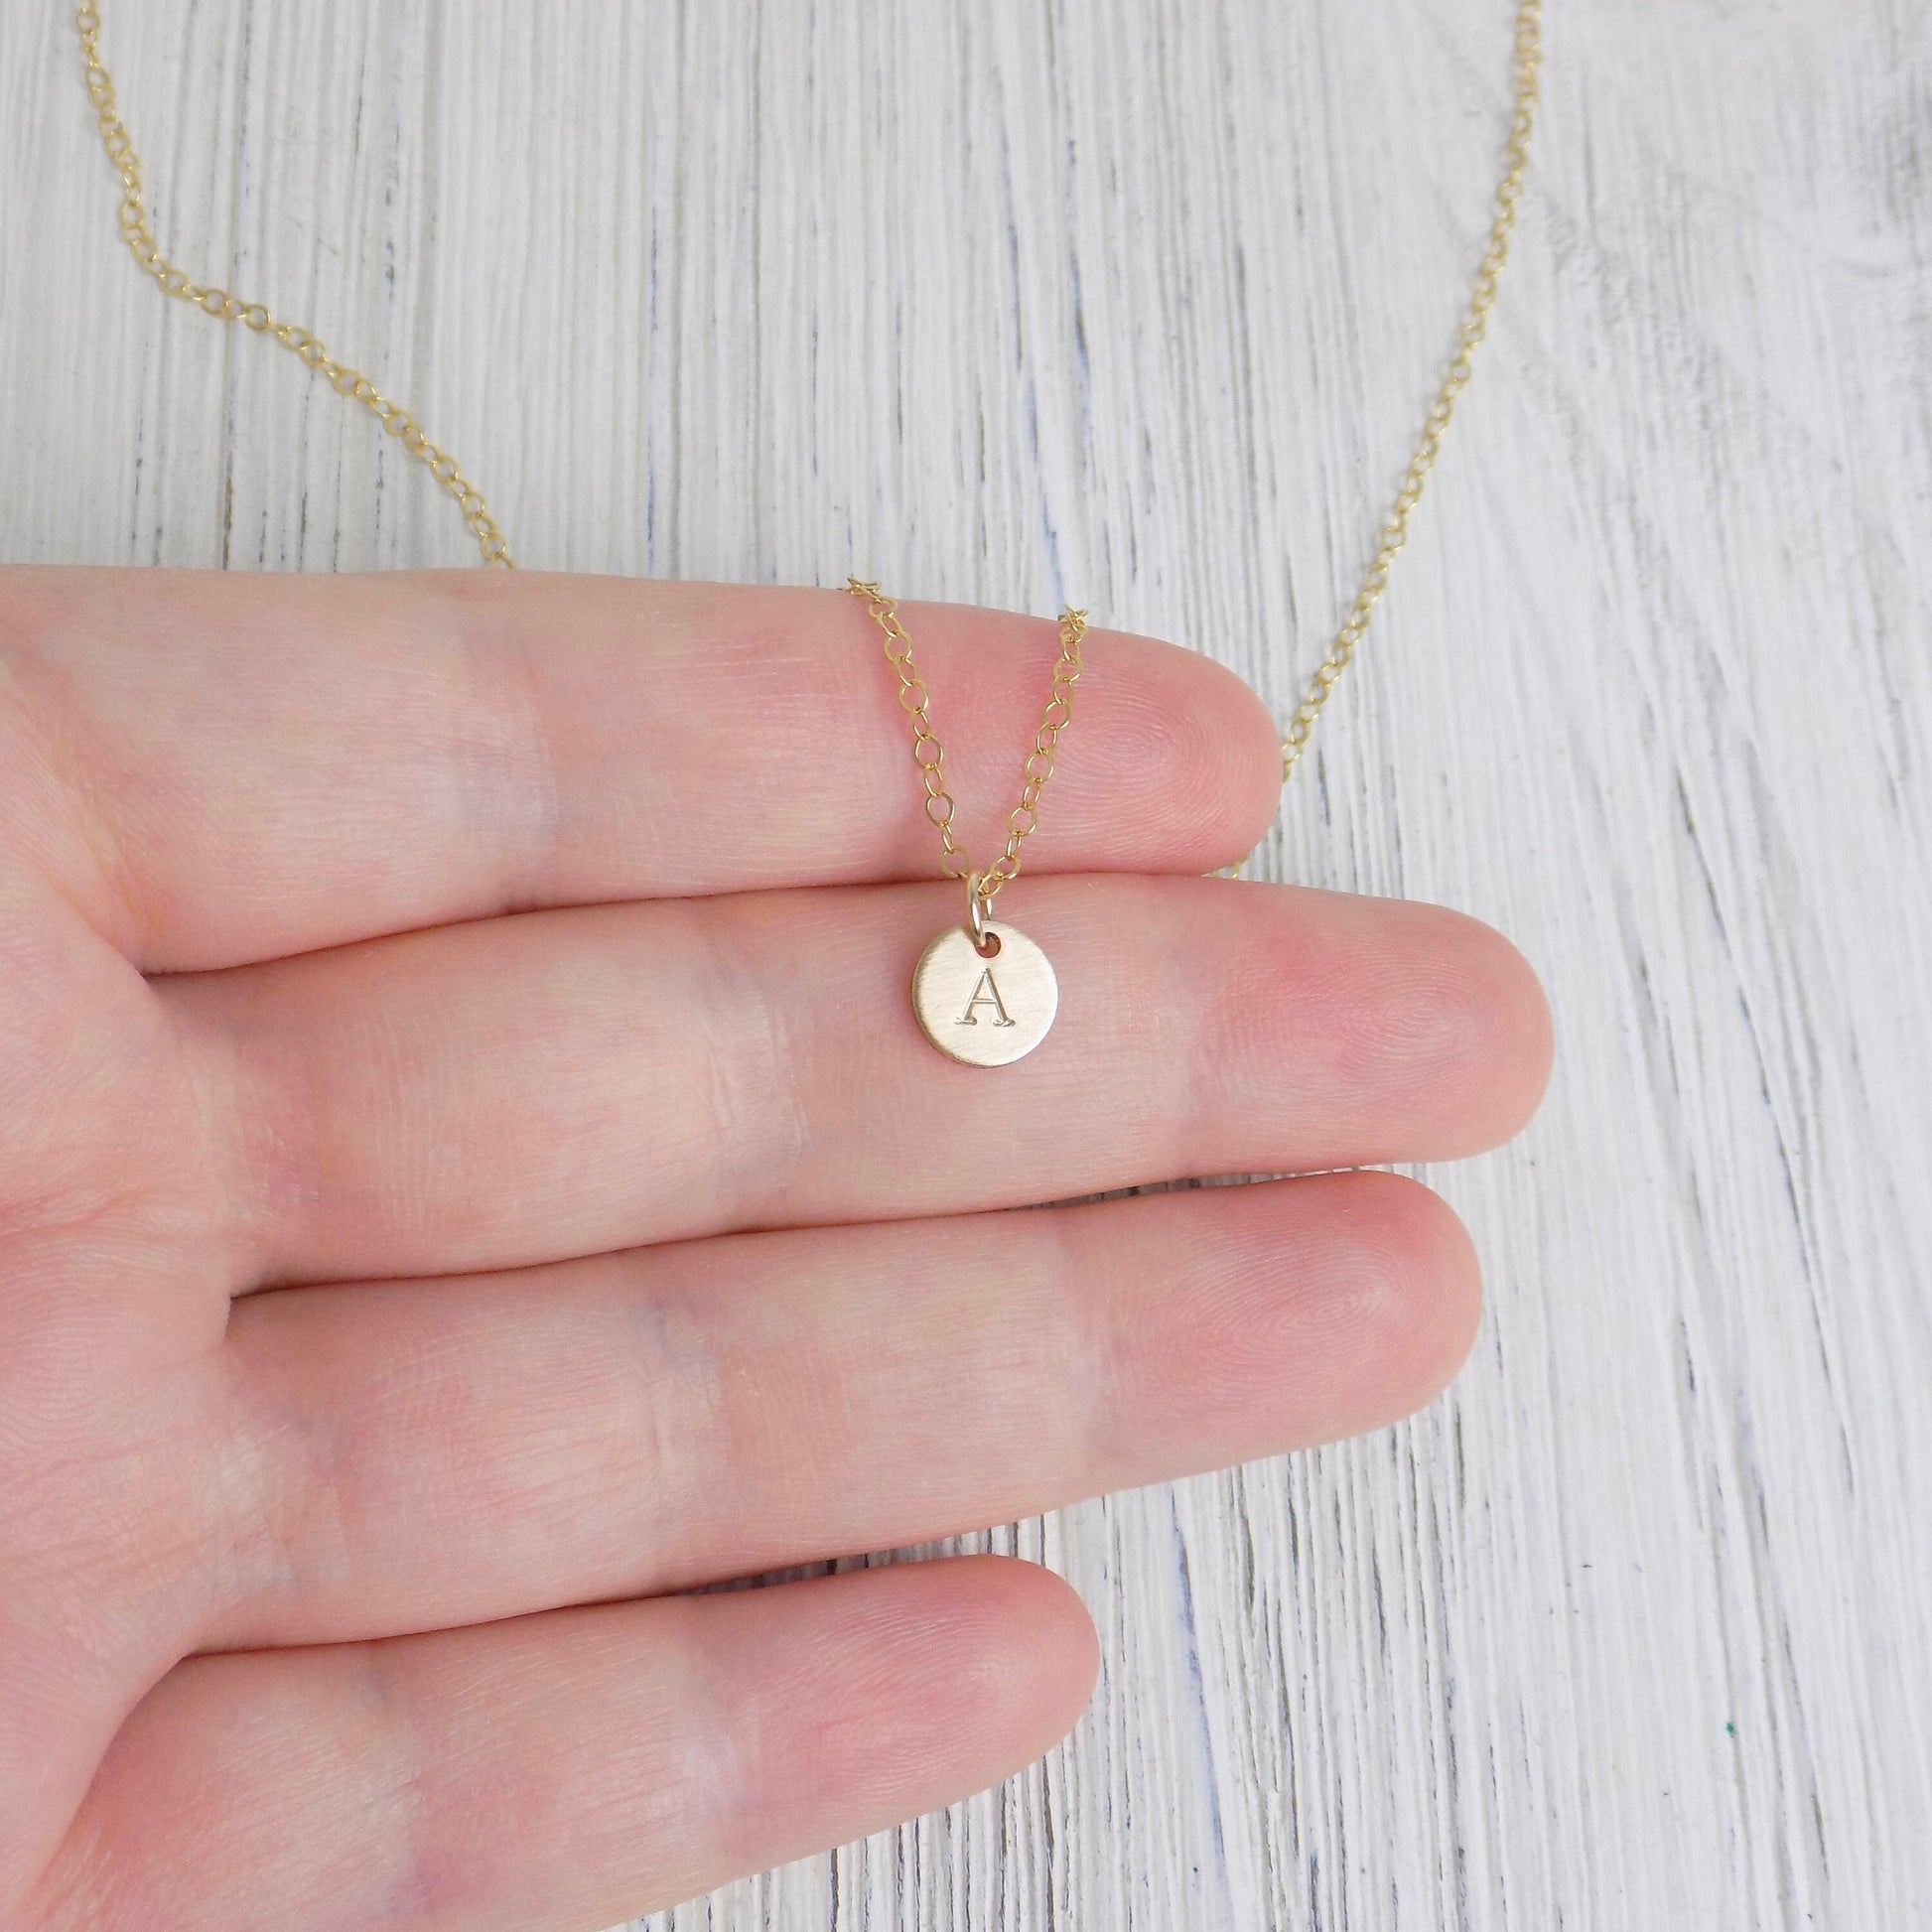 Gifts For Her - Tiny Initial Necklace - 14K Gold Filled Brushed Matte Satin Finish - Personalized Layering Necklace Gold Coin - Z1-20